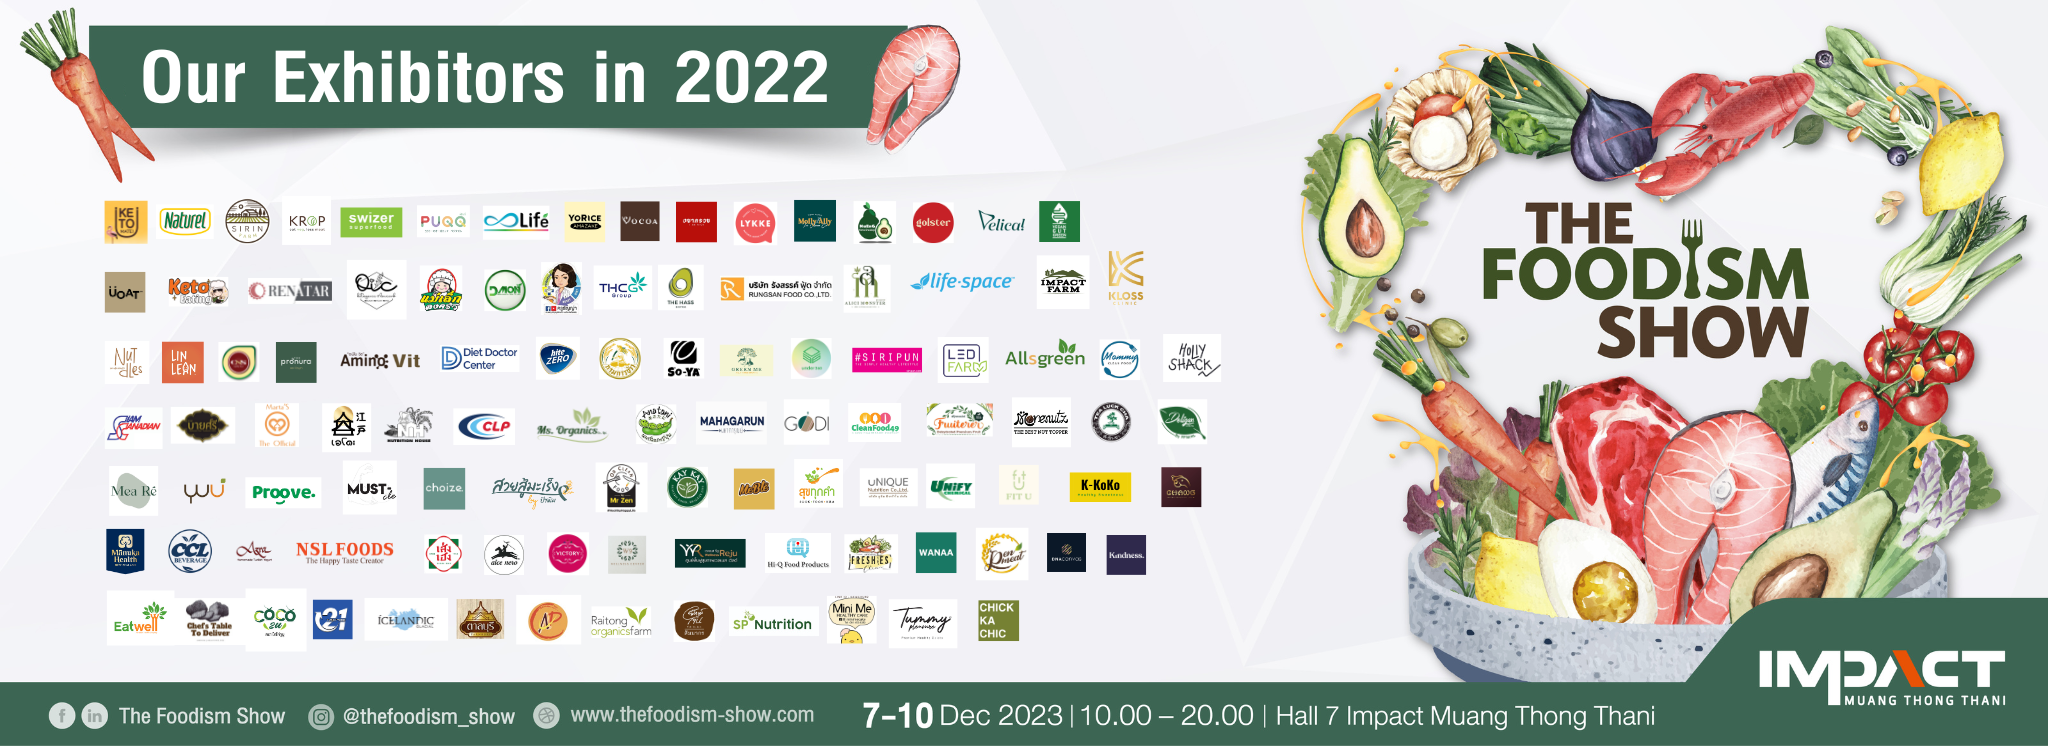 Thefoodismshow-Healthy-food-brands-2022.png